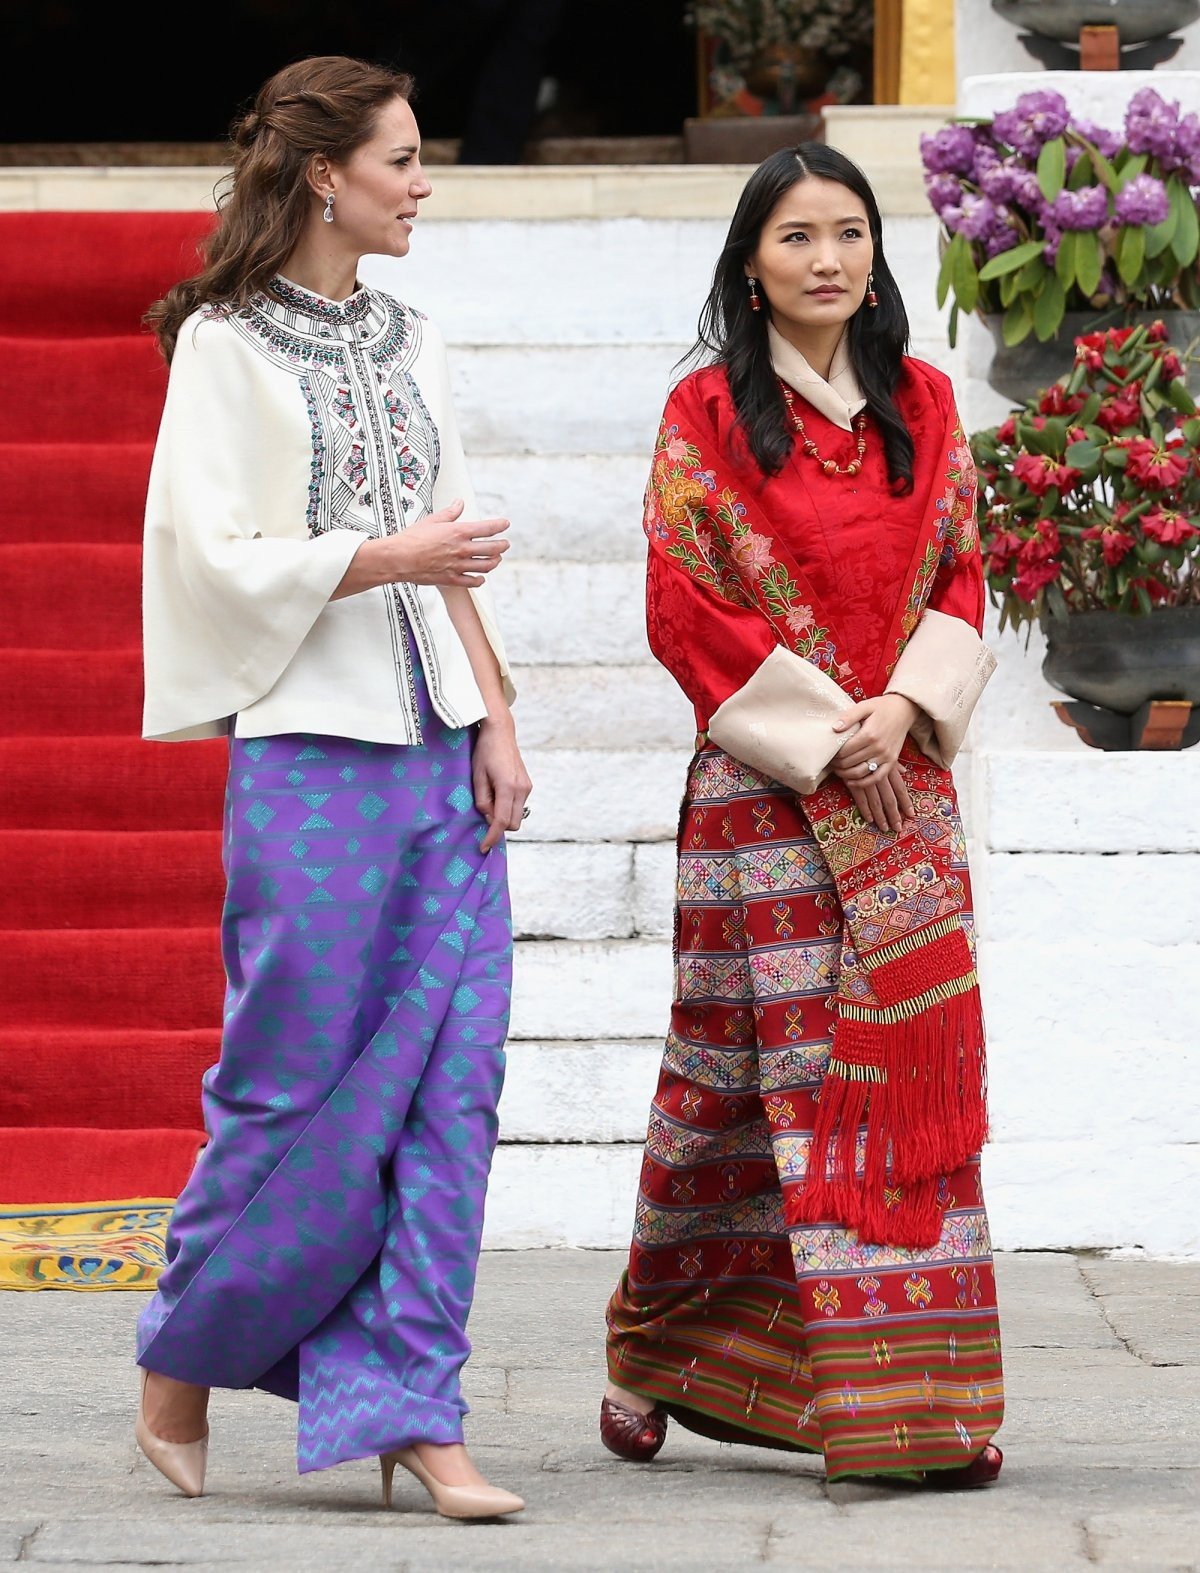 World S Youngest Queen Bhutan S Jetsun Pema Took The Throne At